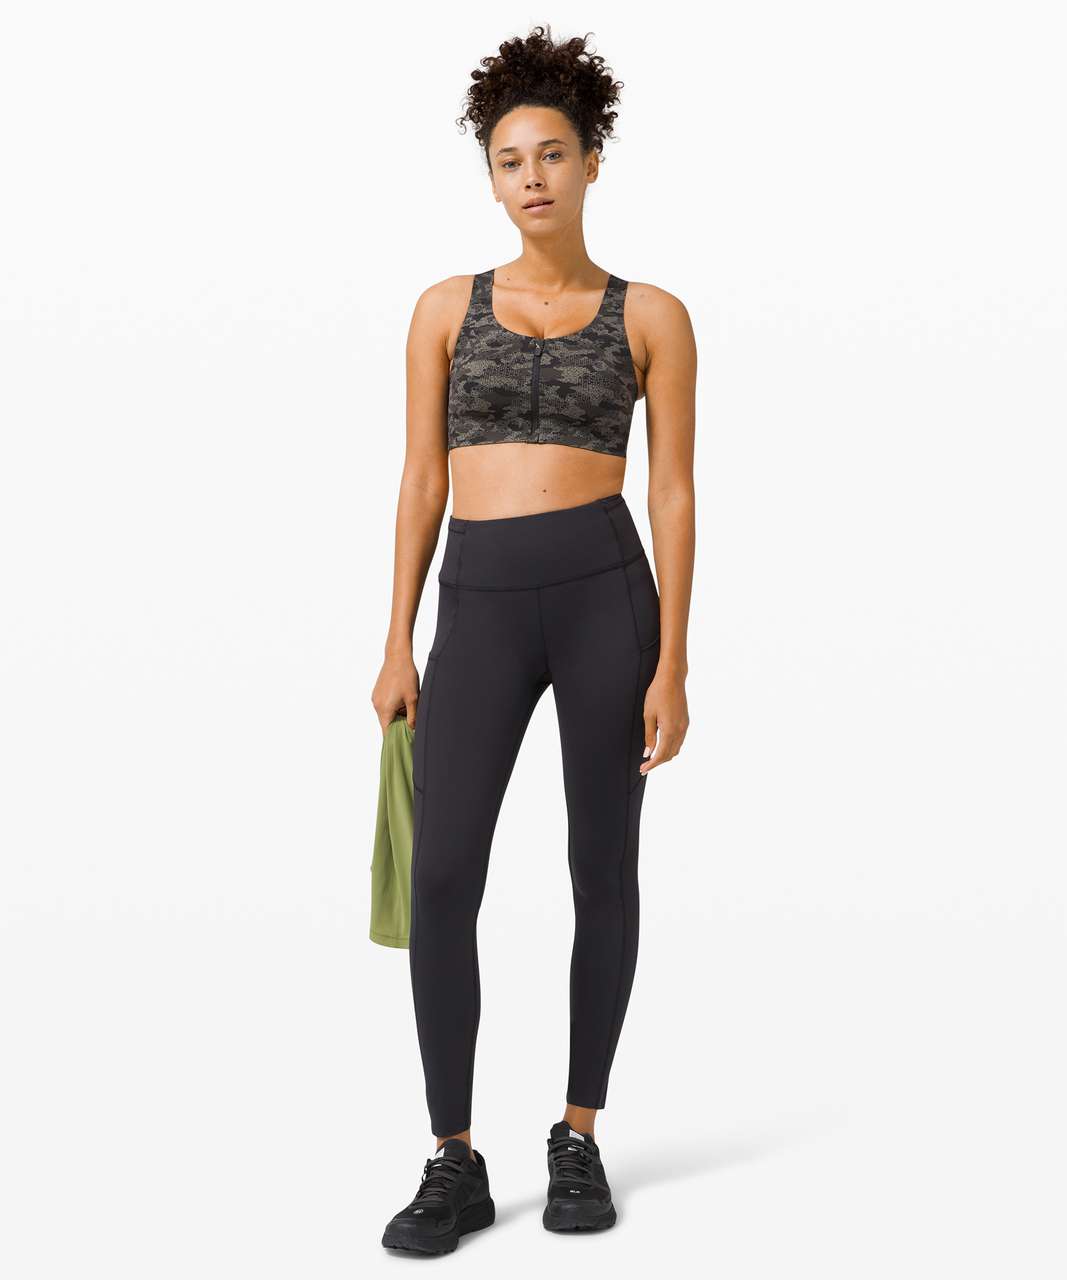 lululemon - This powerfully supportive bra just got the camo print  treatment, and a front zip enclosure. Did we mention it's available in B-E  cup? Meet the Enlite Bra Zip Front